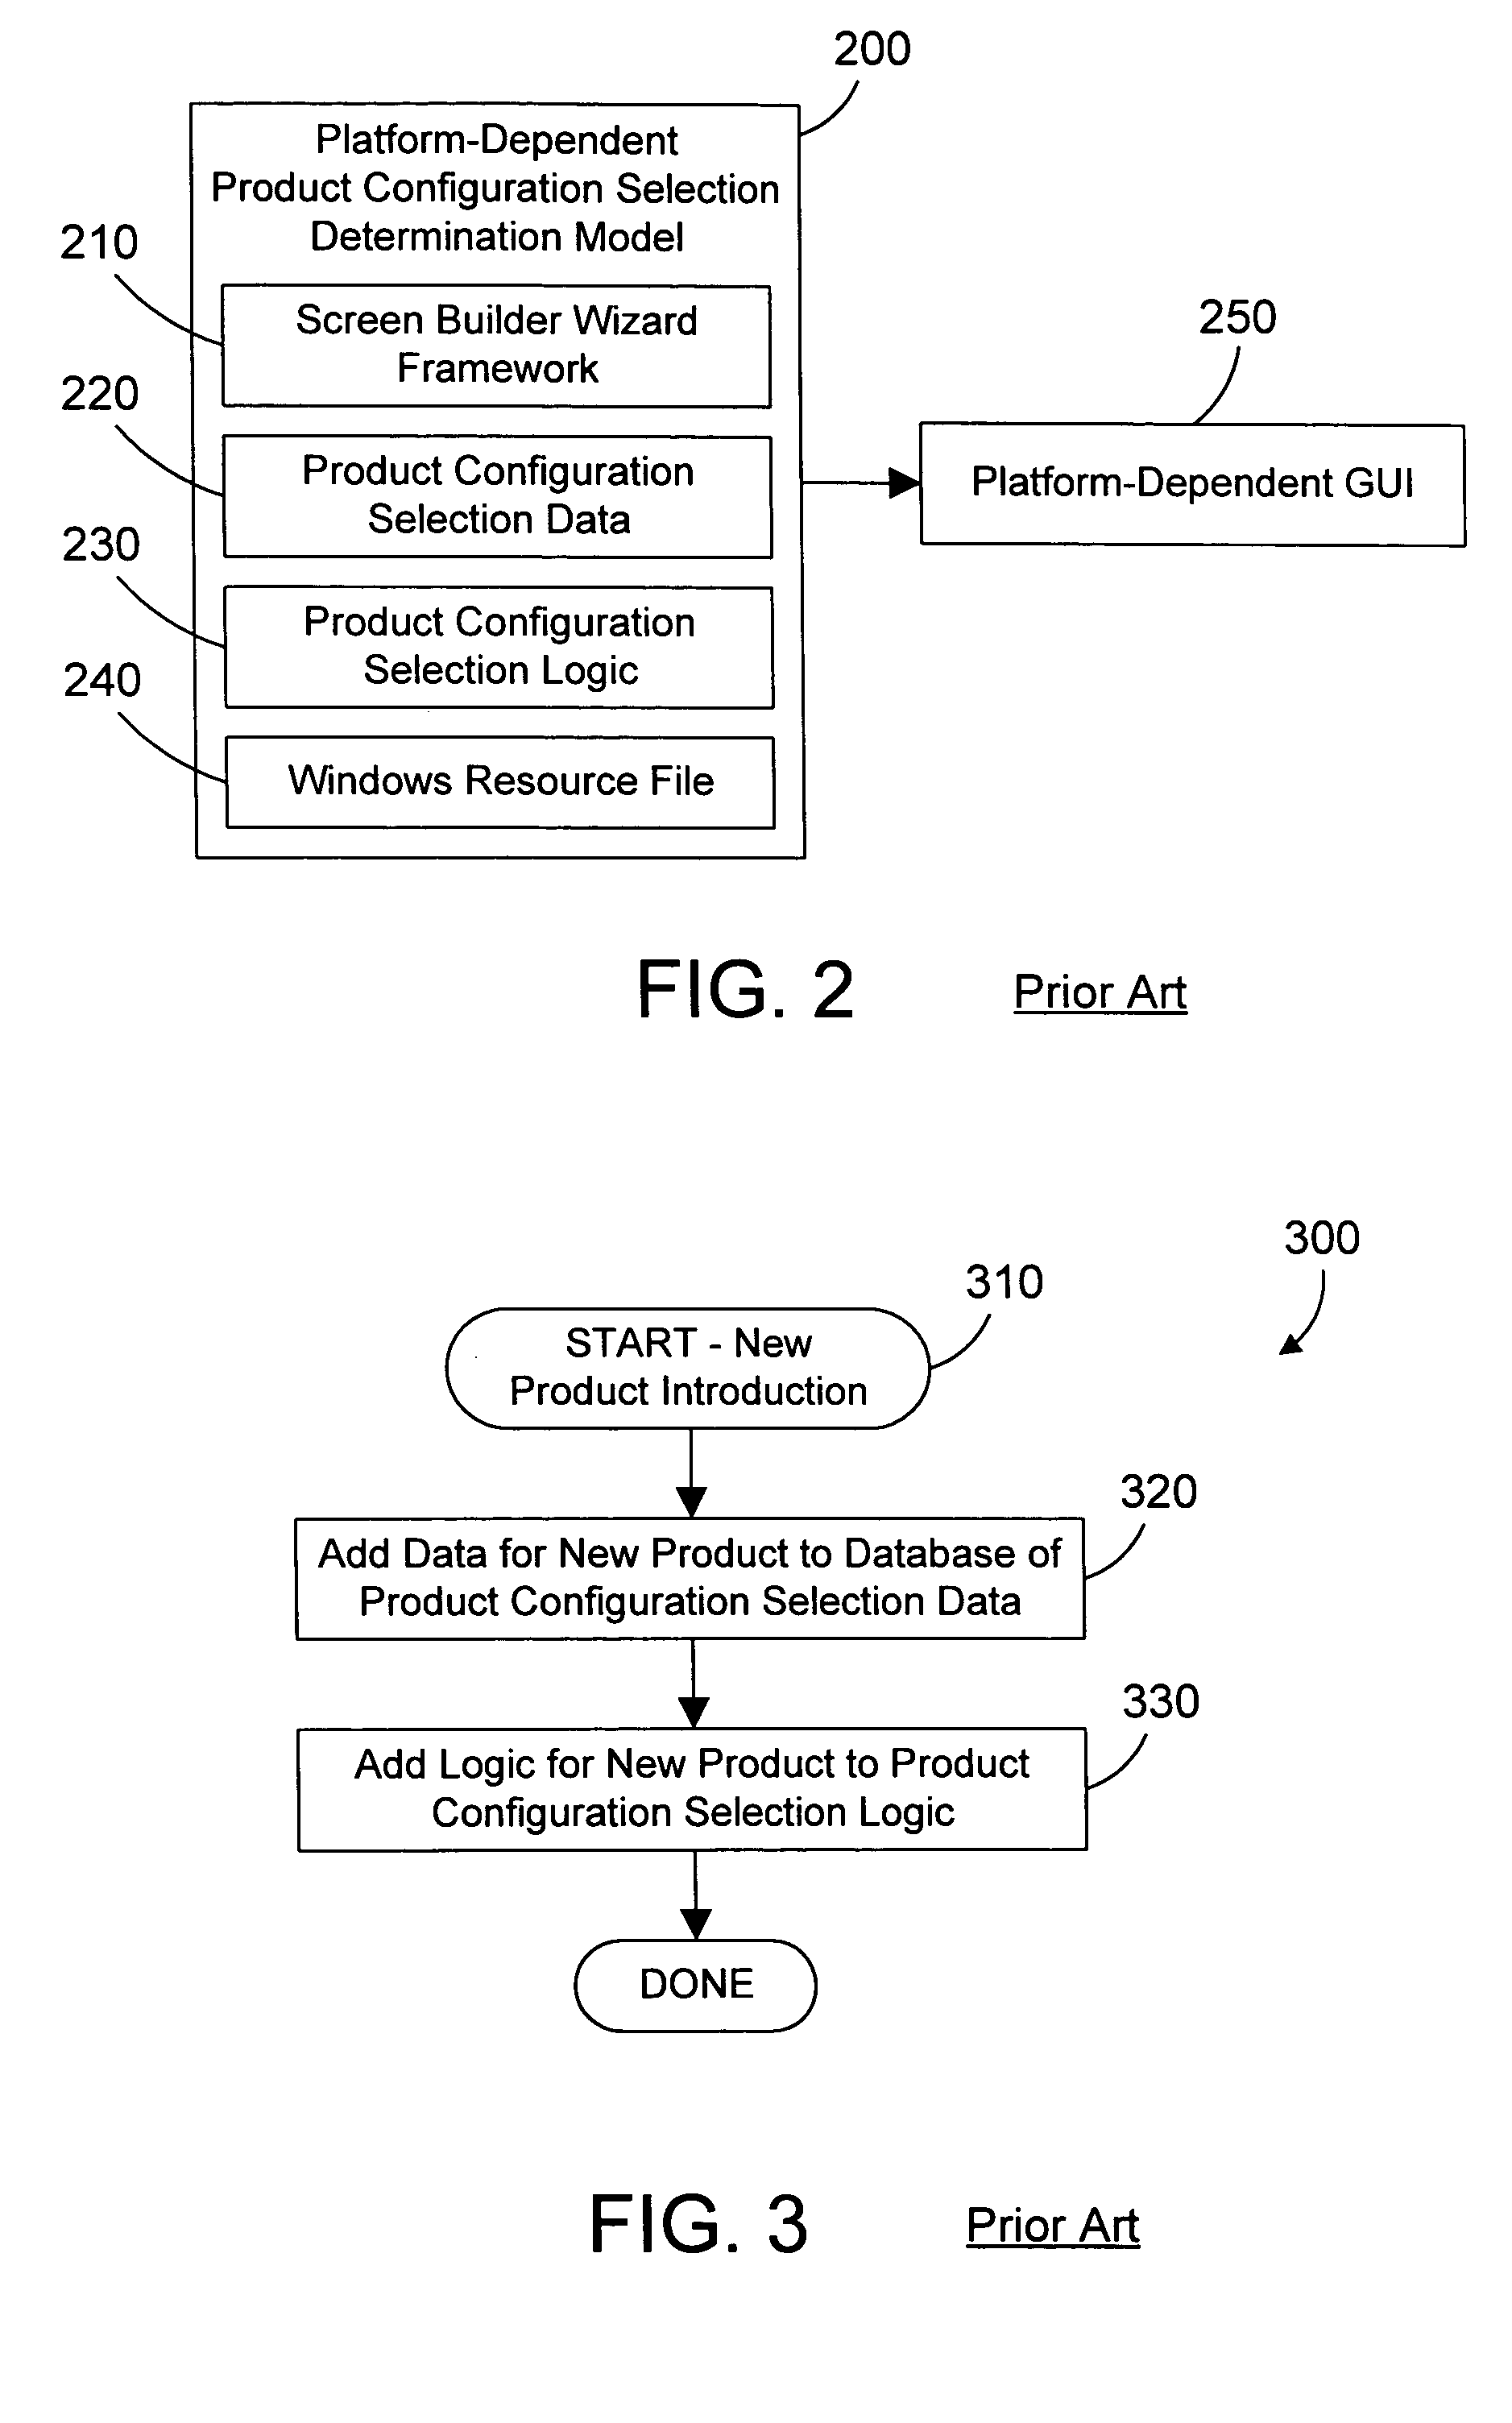 Object oriented framework mechanism and method for product configuration selection determination